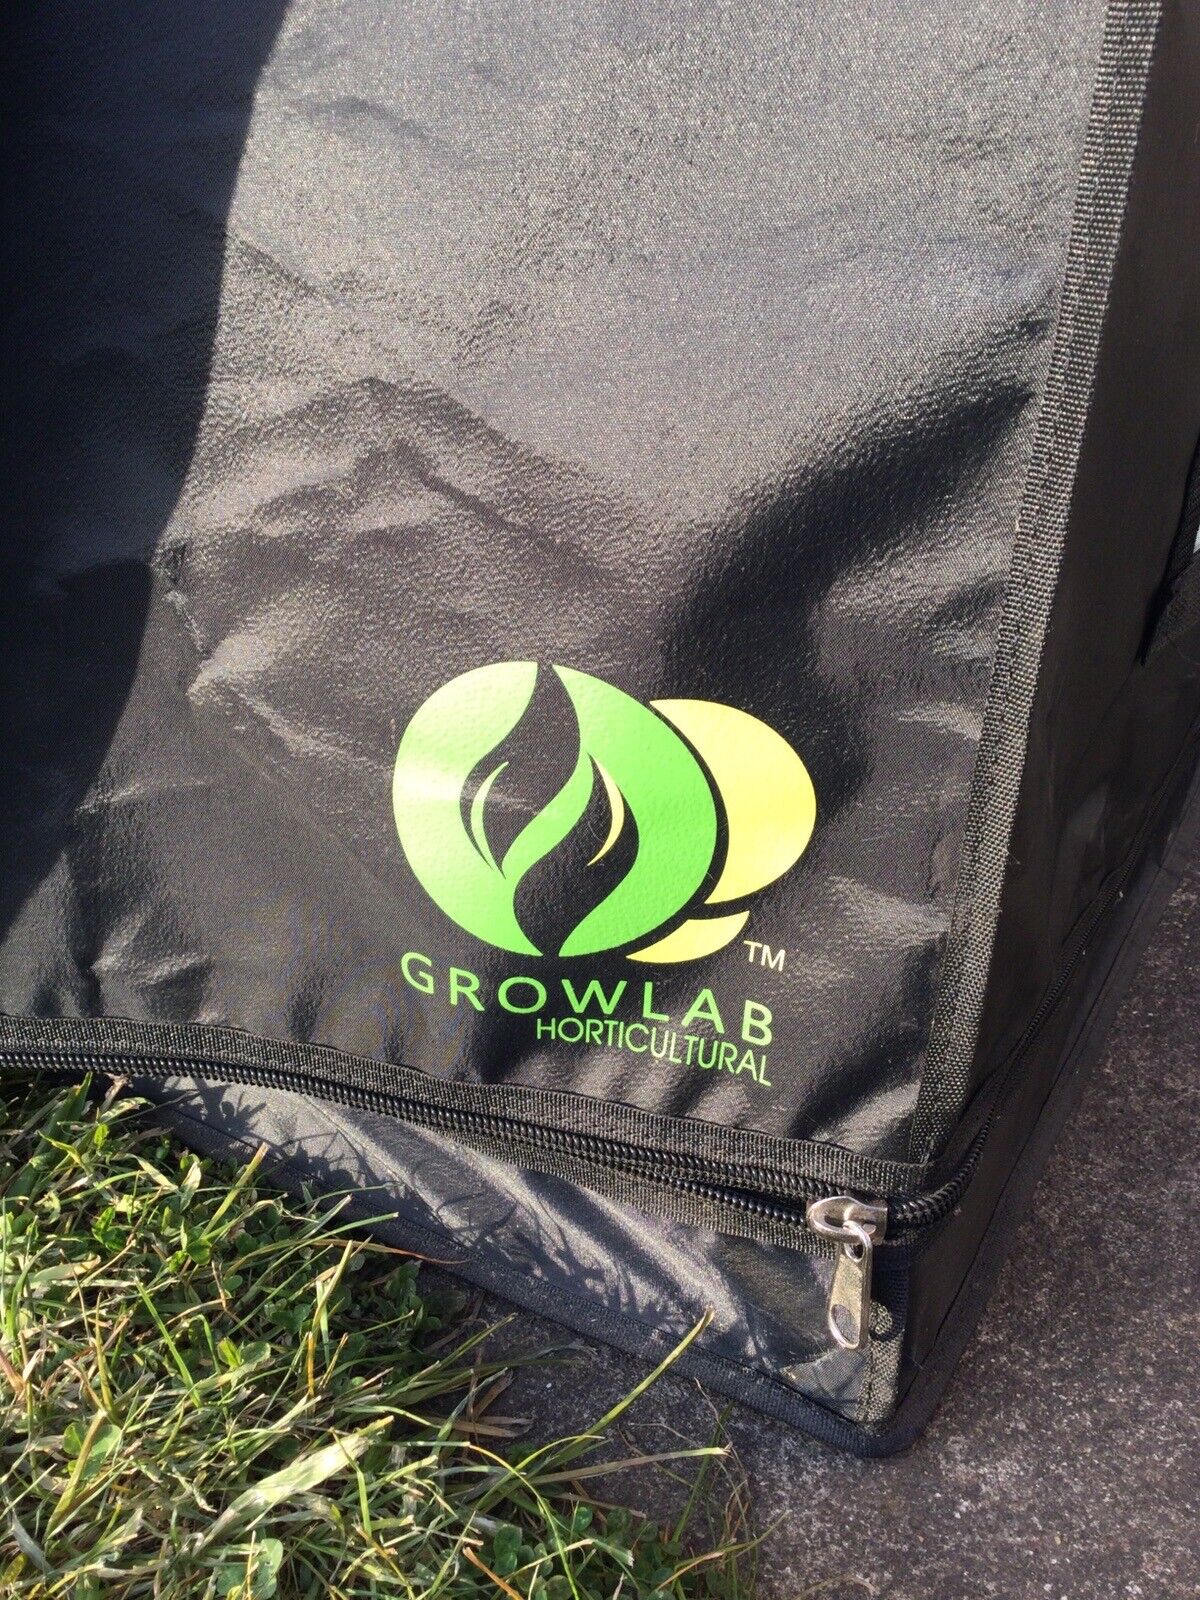 GrowLab 72” X 32” Horticulture Mylar Tent, Preowned